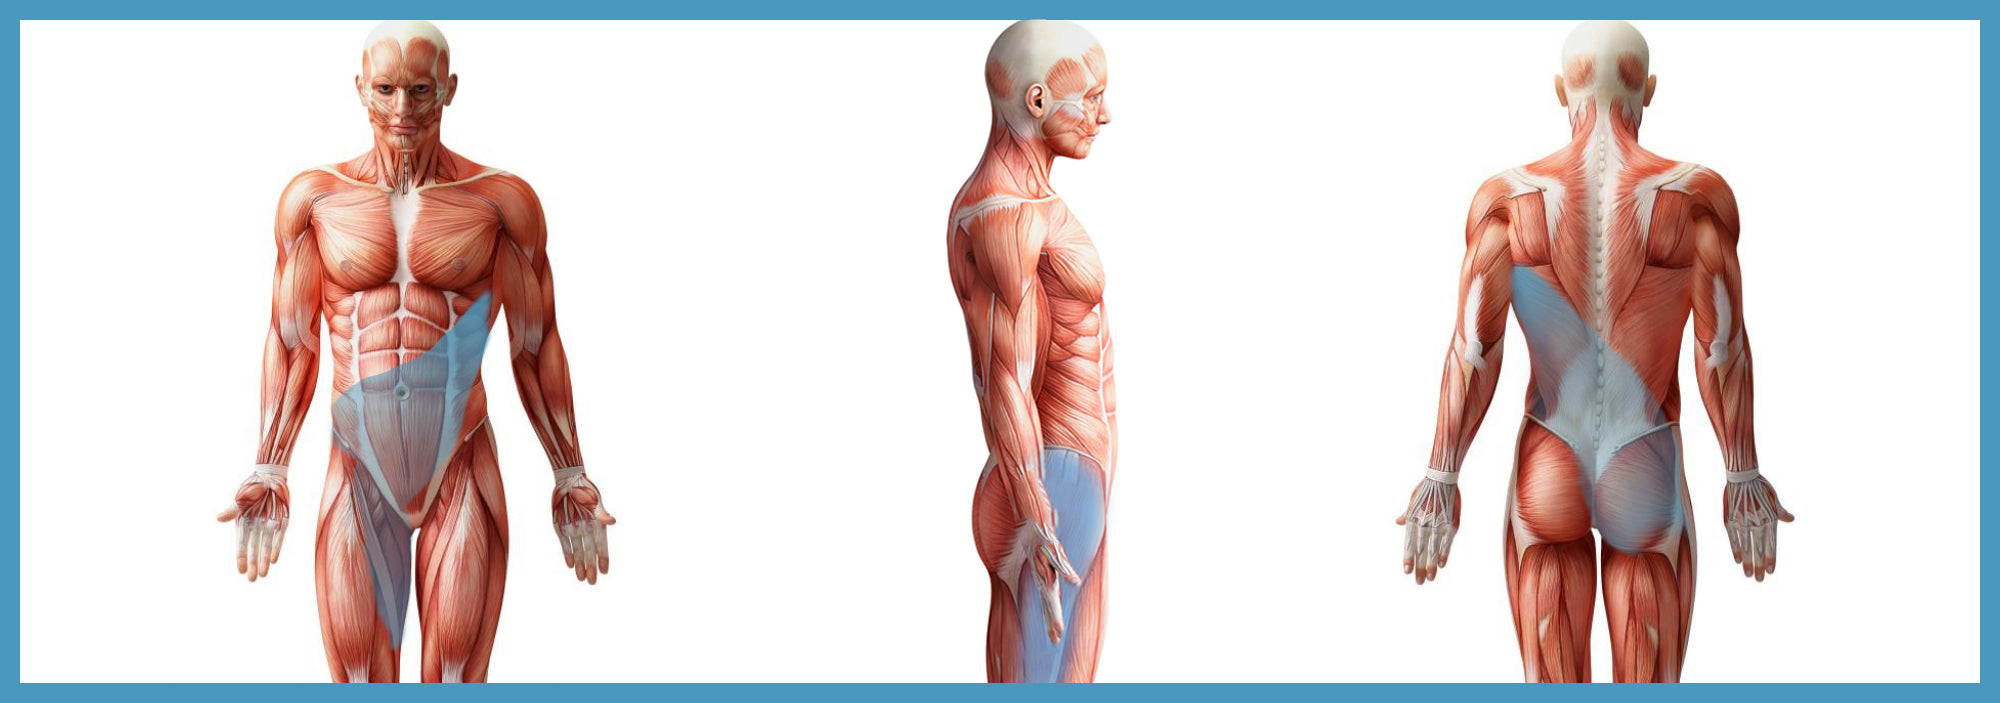 Biomechanics Monthly | Muscular Systems and Anatomical Slings